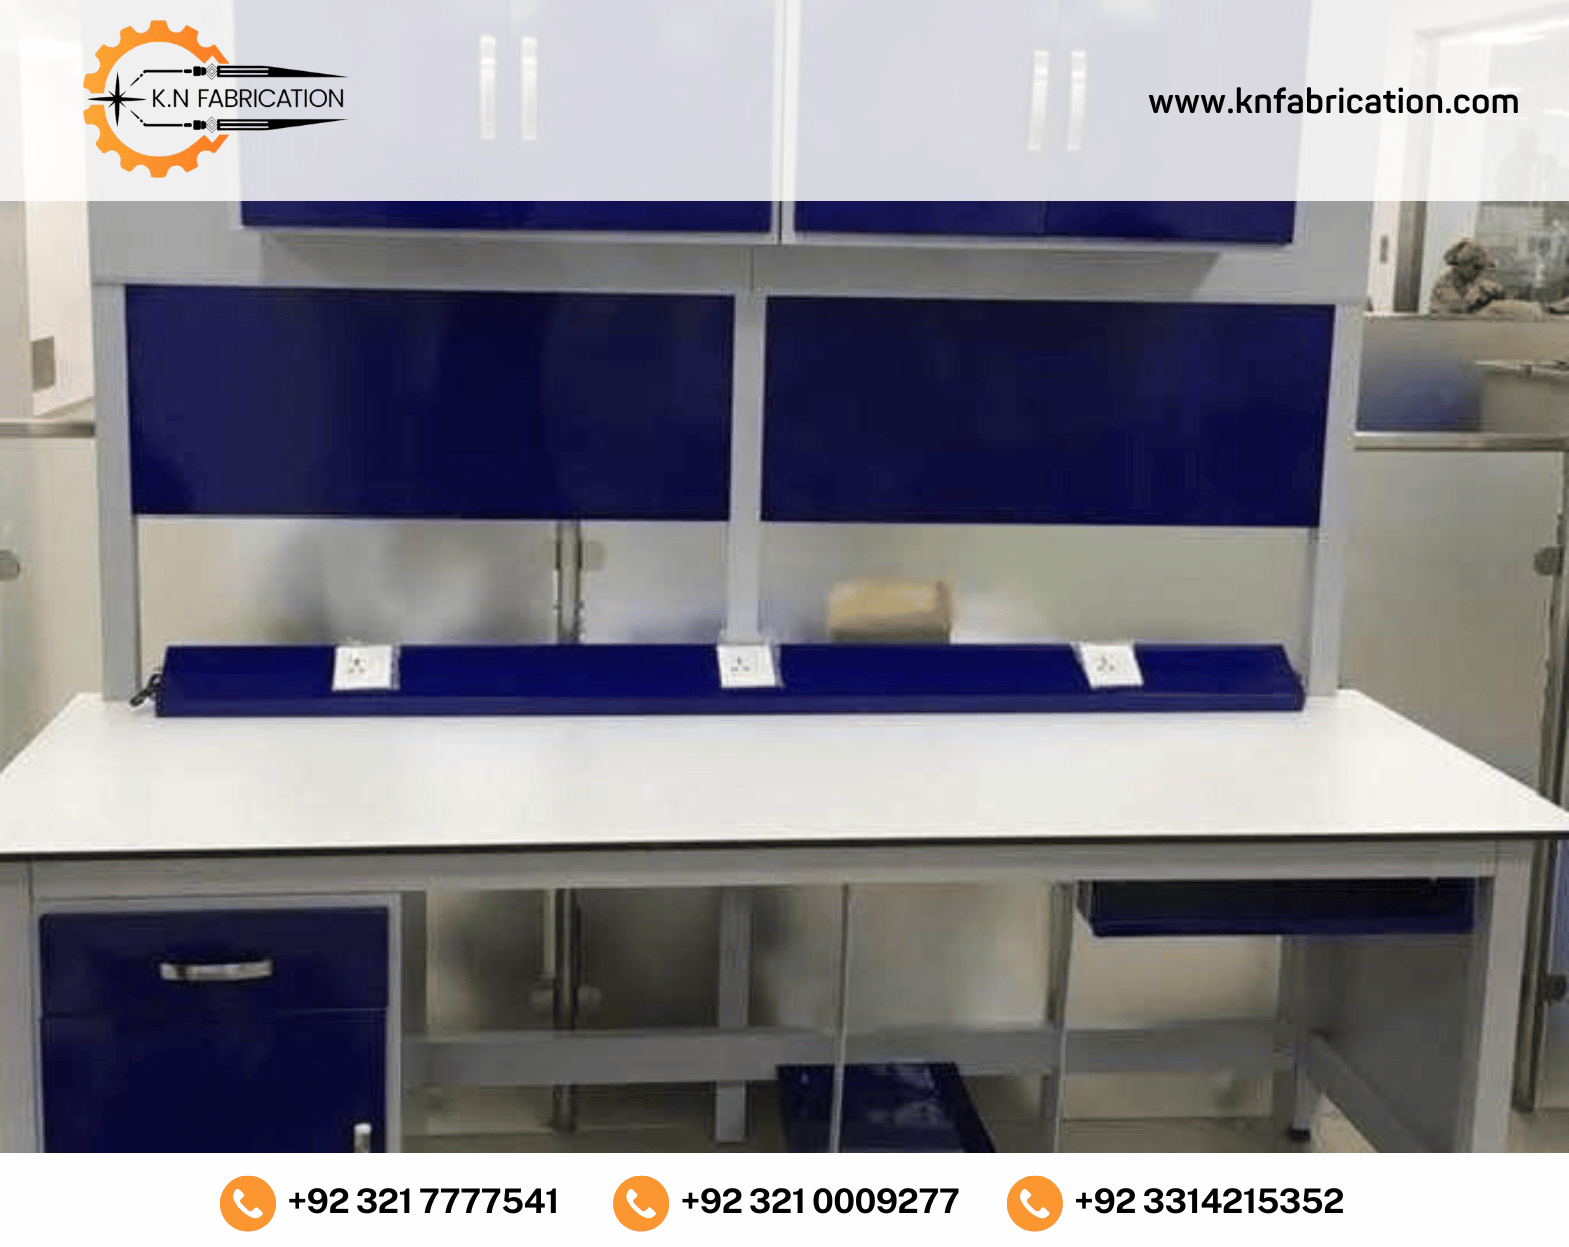 High-quality laboratory workstation in Pakistan by K.N Fabrication